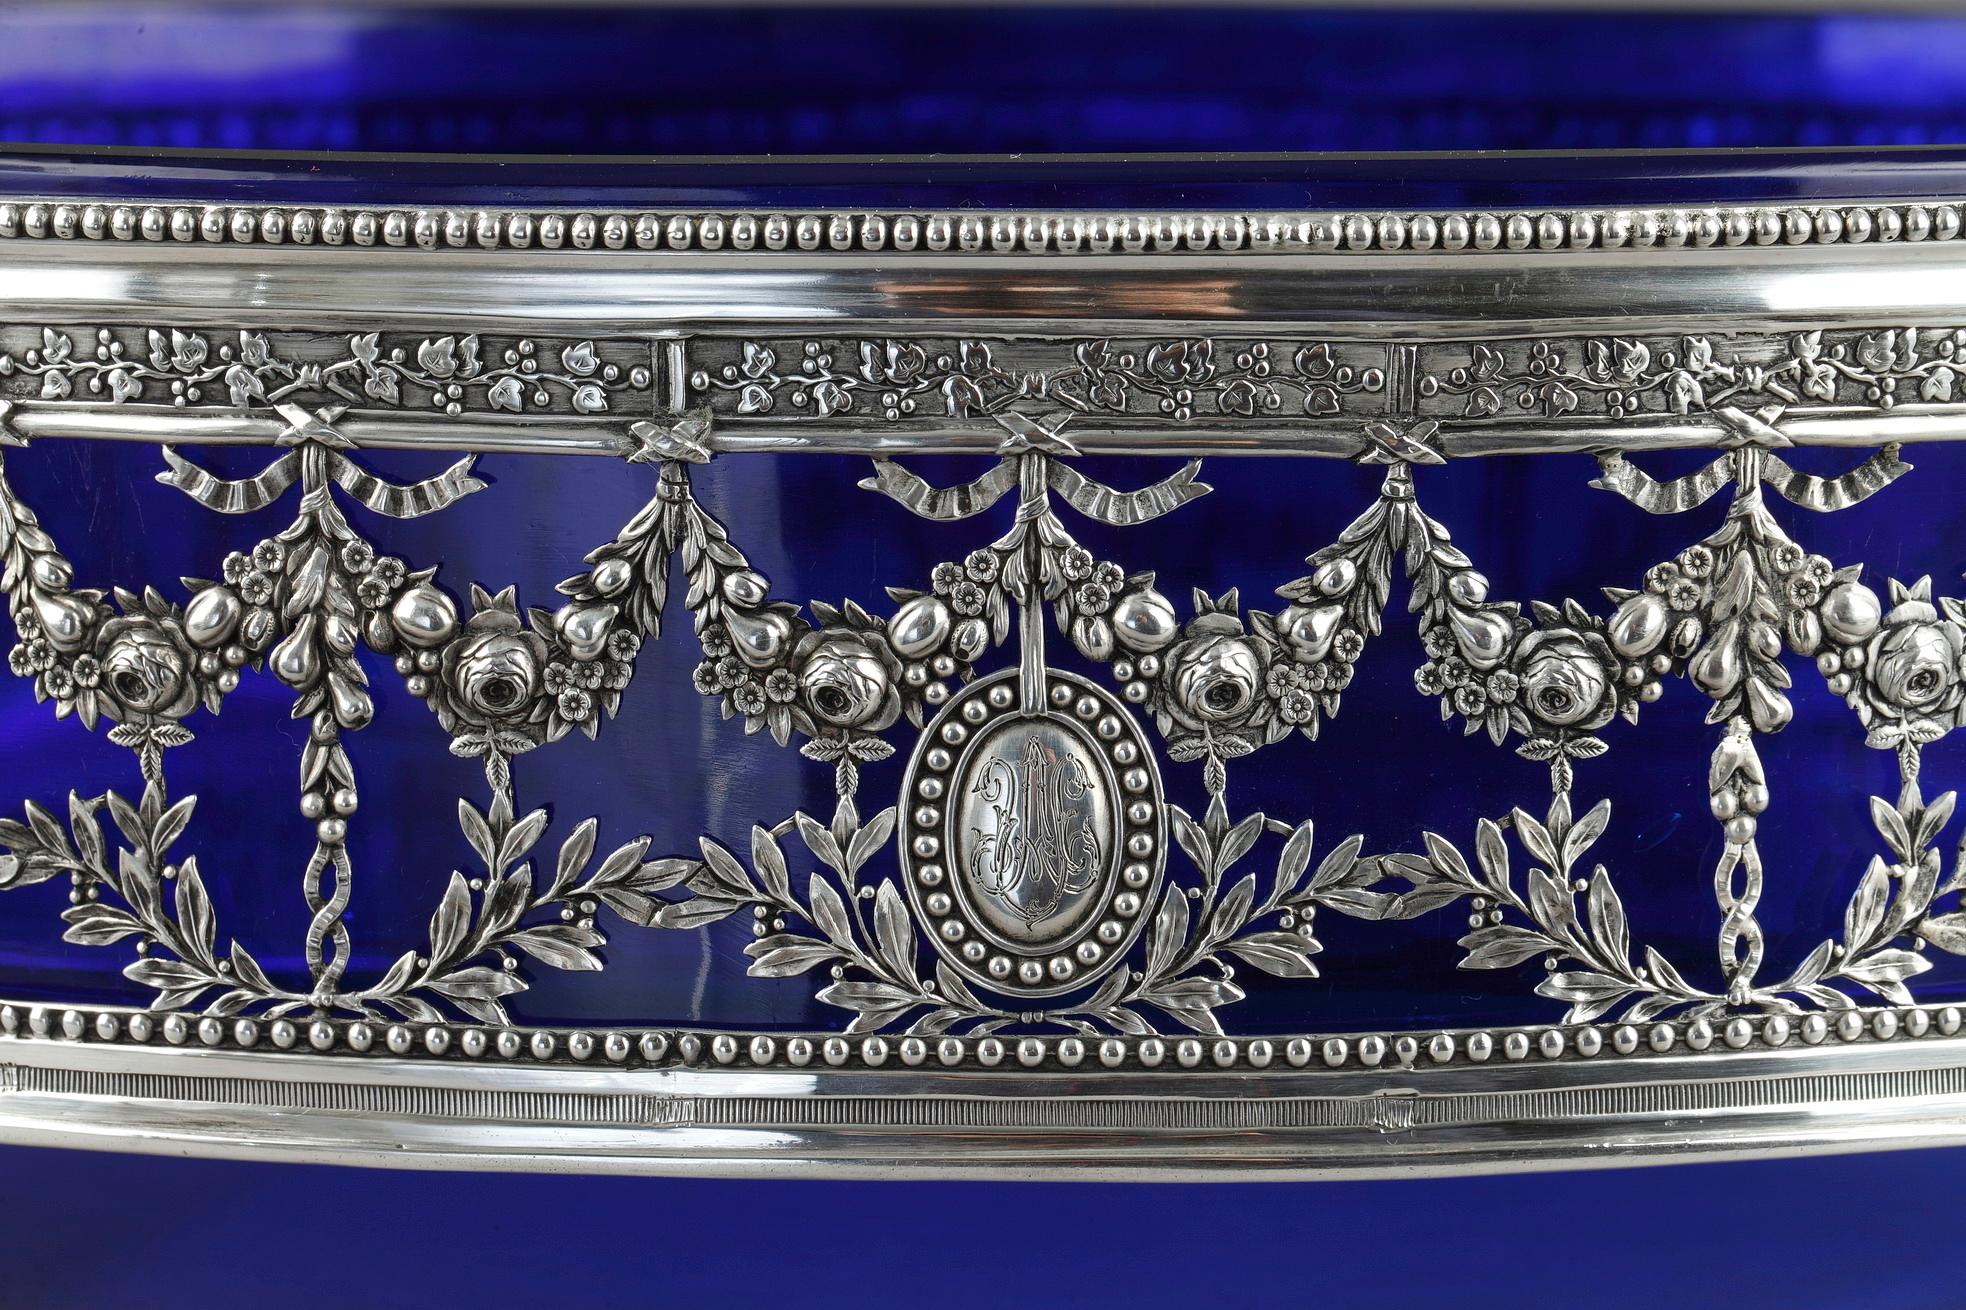 A Silver center of table that can be used as a jardinière. The center of the table rests on four hoofed feet. The collar presents a decoration of floral garlands; Roses, laurel foliage and fruit; Perforated and friezes of vine of vines on a silver